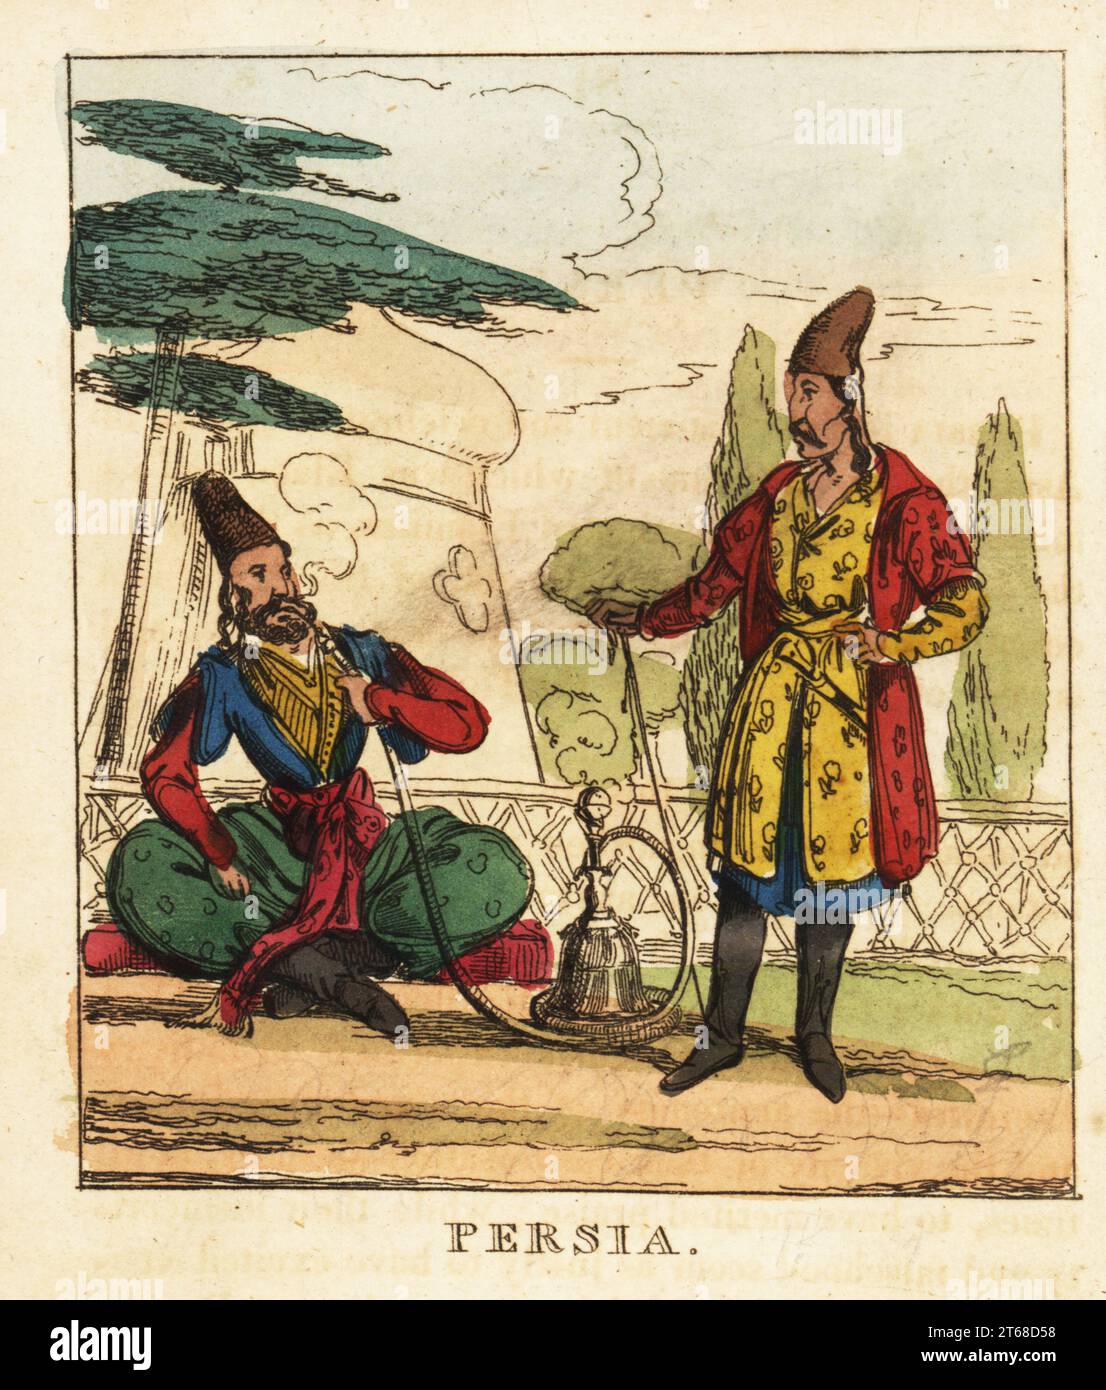 Costumes of Persia, 19th century. A bearded man sits on a divan smoking a hookah pipe. Another man in fez, coat, robe and boots with a dagger. Handcoloured copperplate engraving from The World in Miniature, or Panorama of the Costumes, Manners & Customs of All Nations, John Bysh, London, 1825. Stock Photo